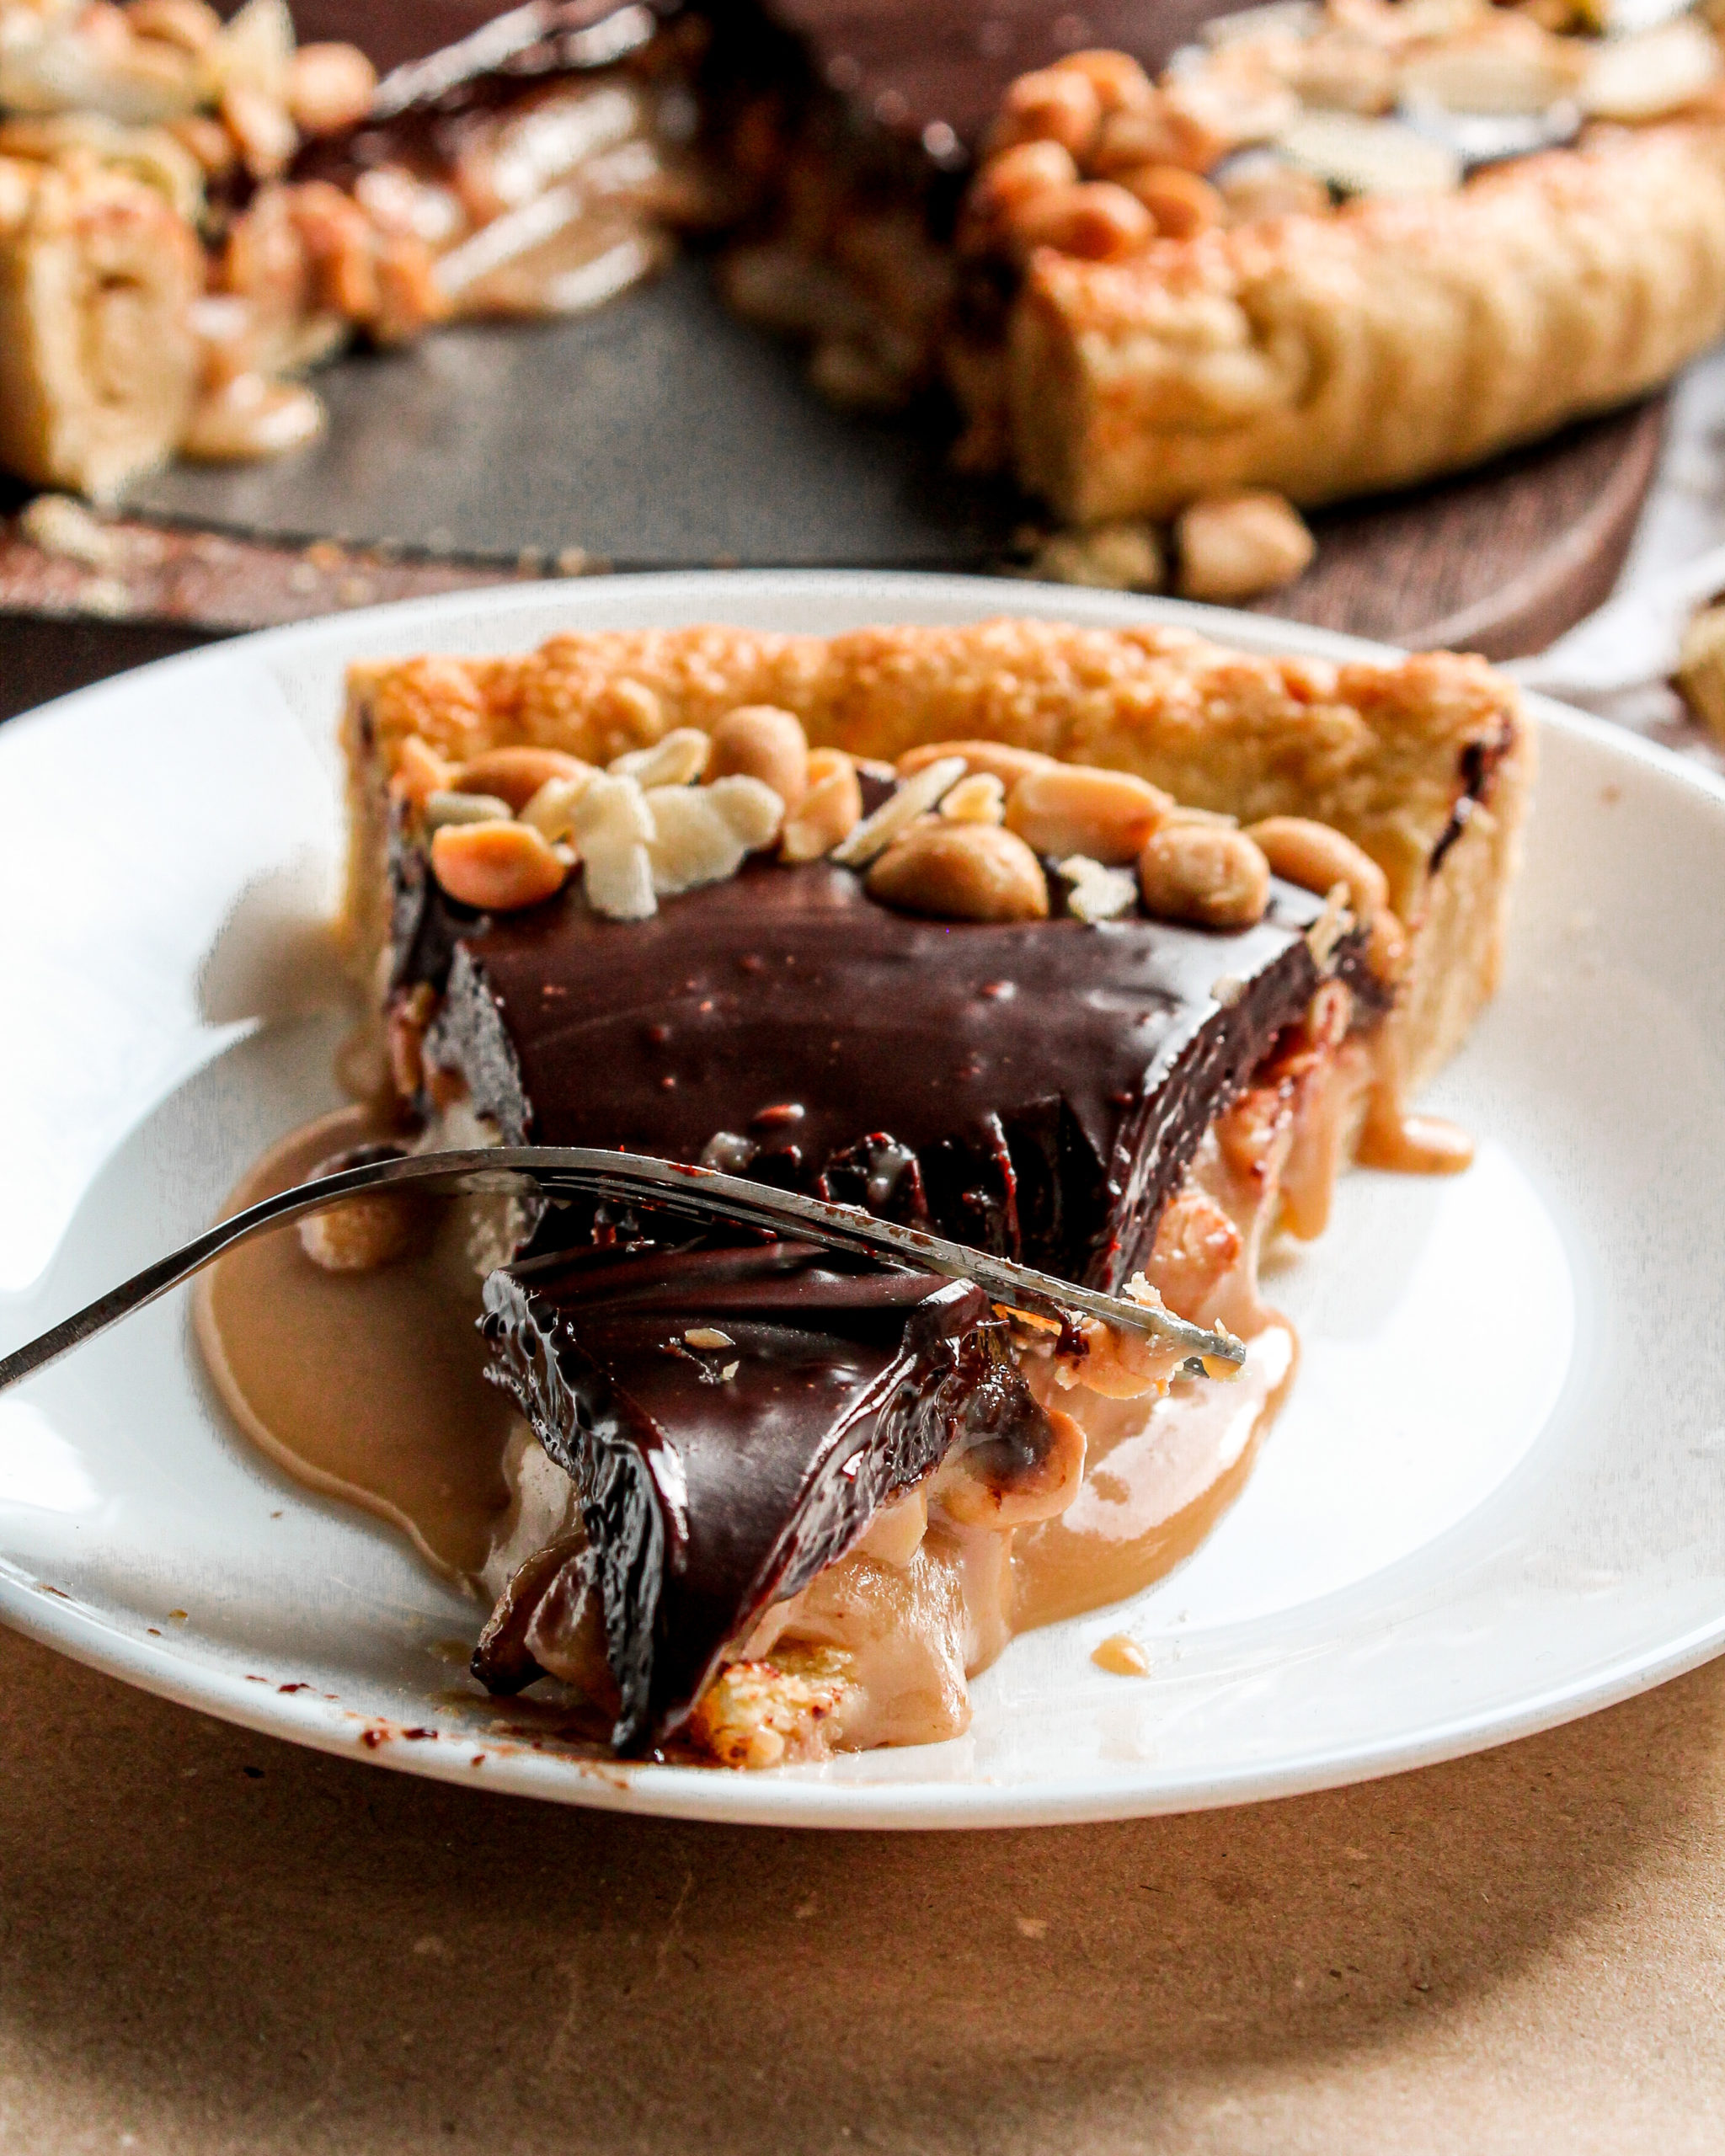 Snickers Tart With Salted Peanuts
